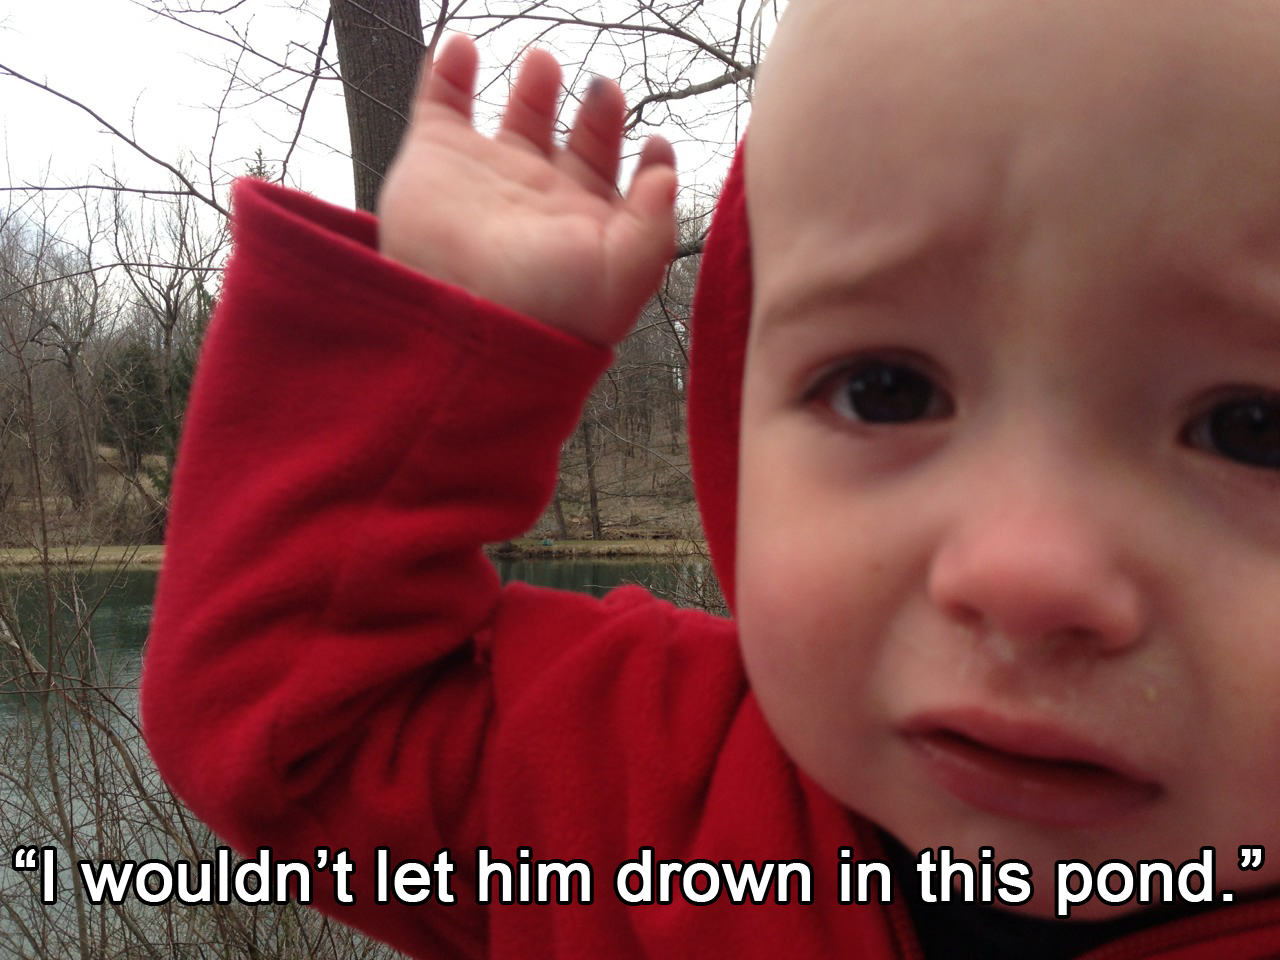 reasons my kid is crying - "I wouldn't let him drown in this pond."